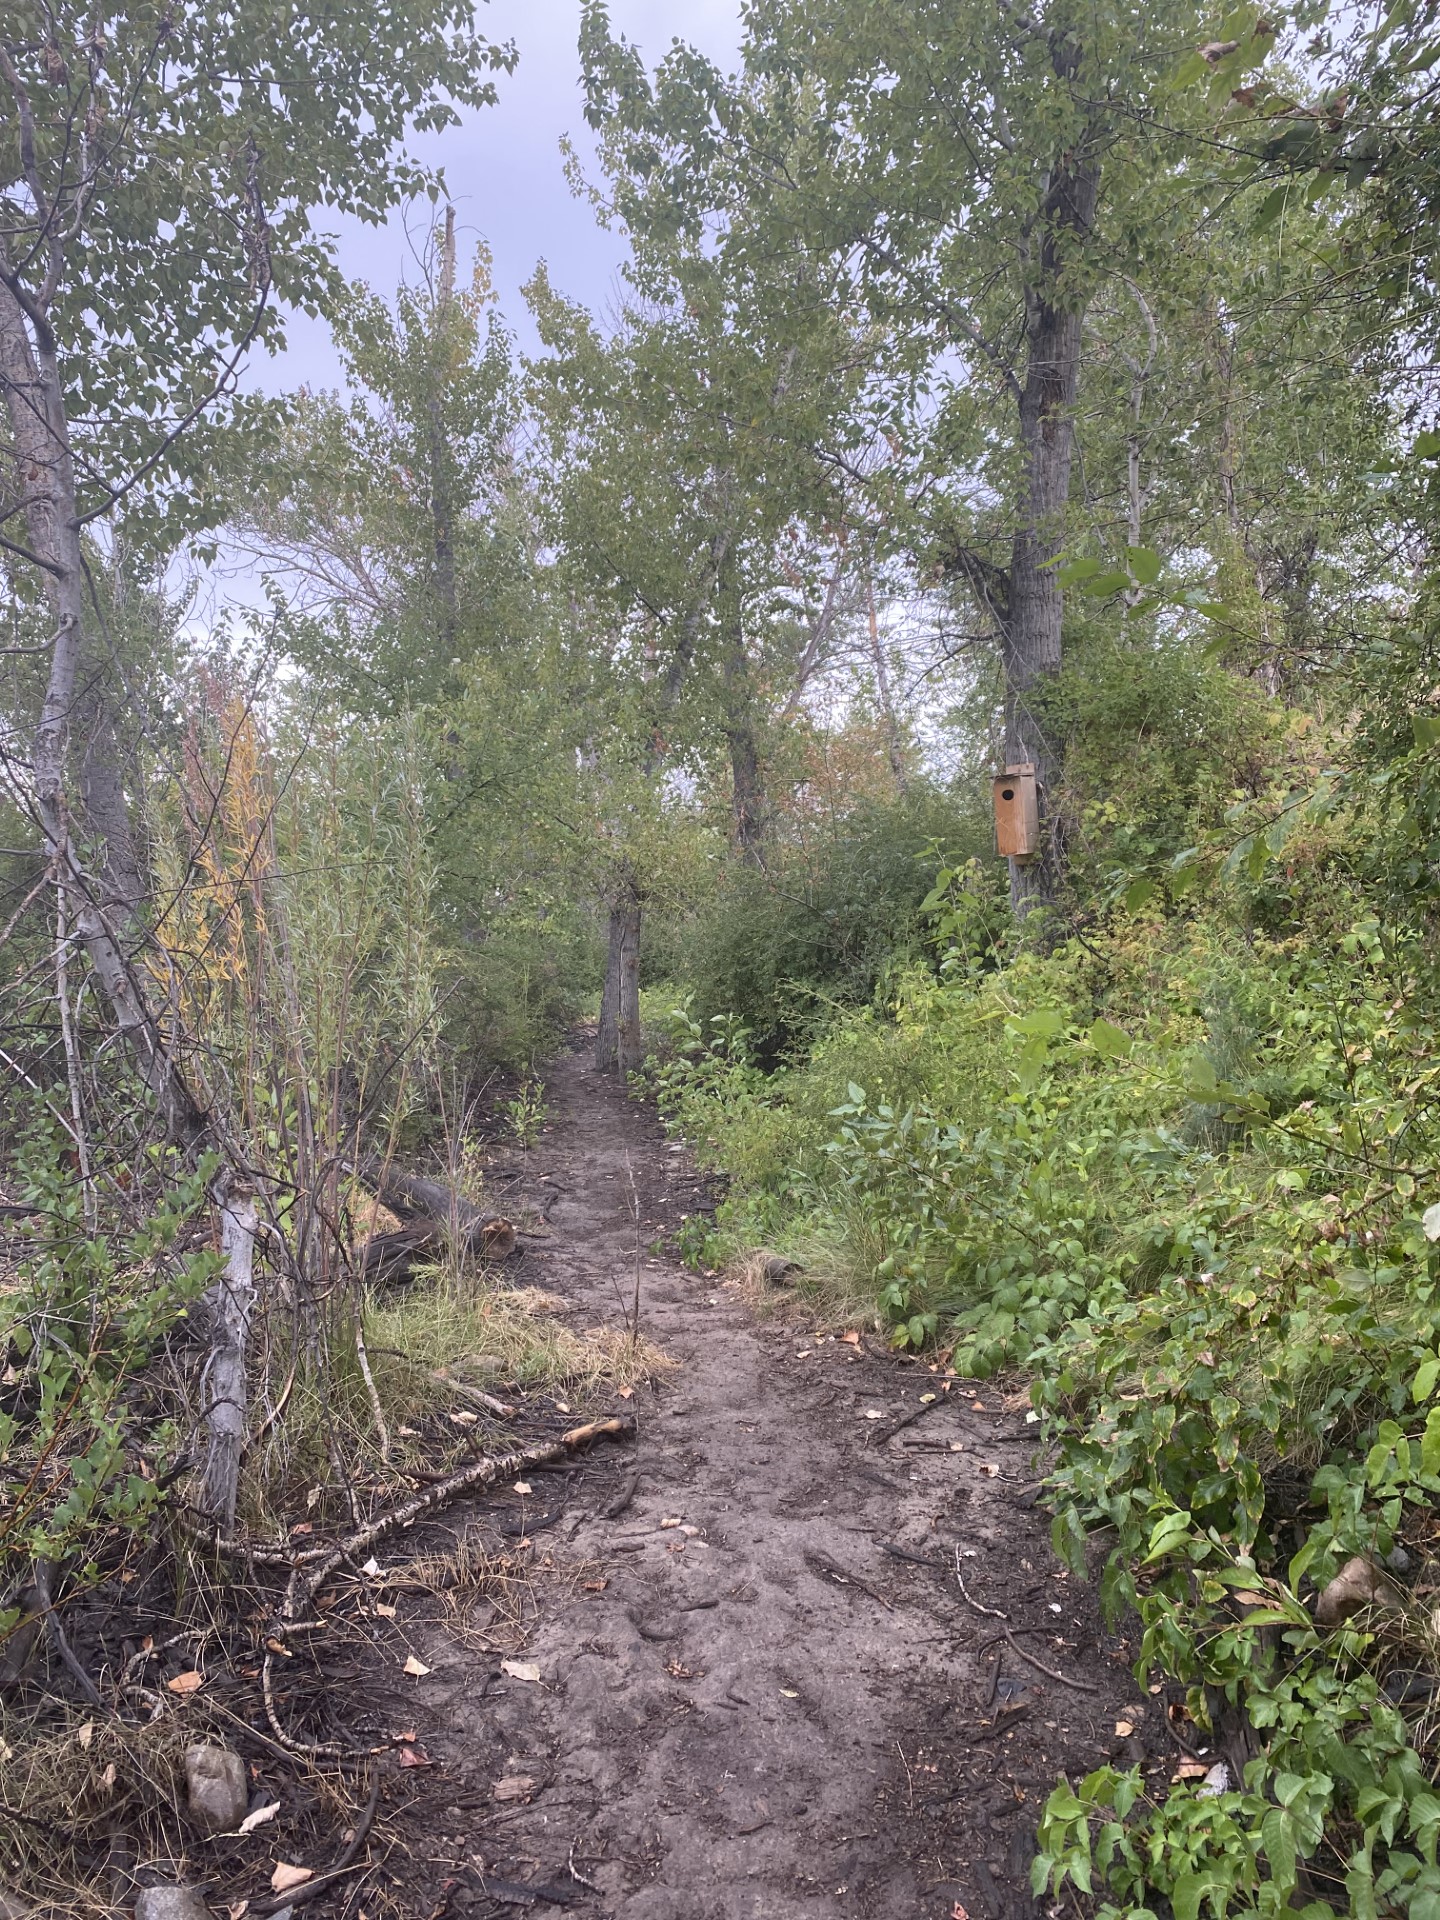 a brand new trail with freshly disturbed dirt stretches through poison ivy and rose shrubs. cottonwood trees surround the area, and one of these has a wood duck nest box hanging on the trunk.